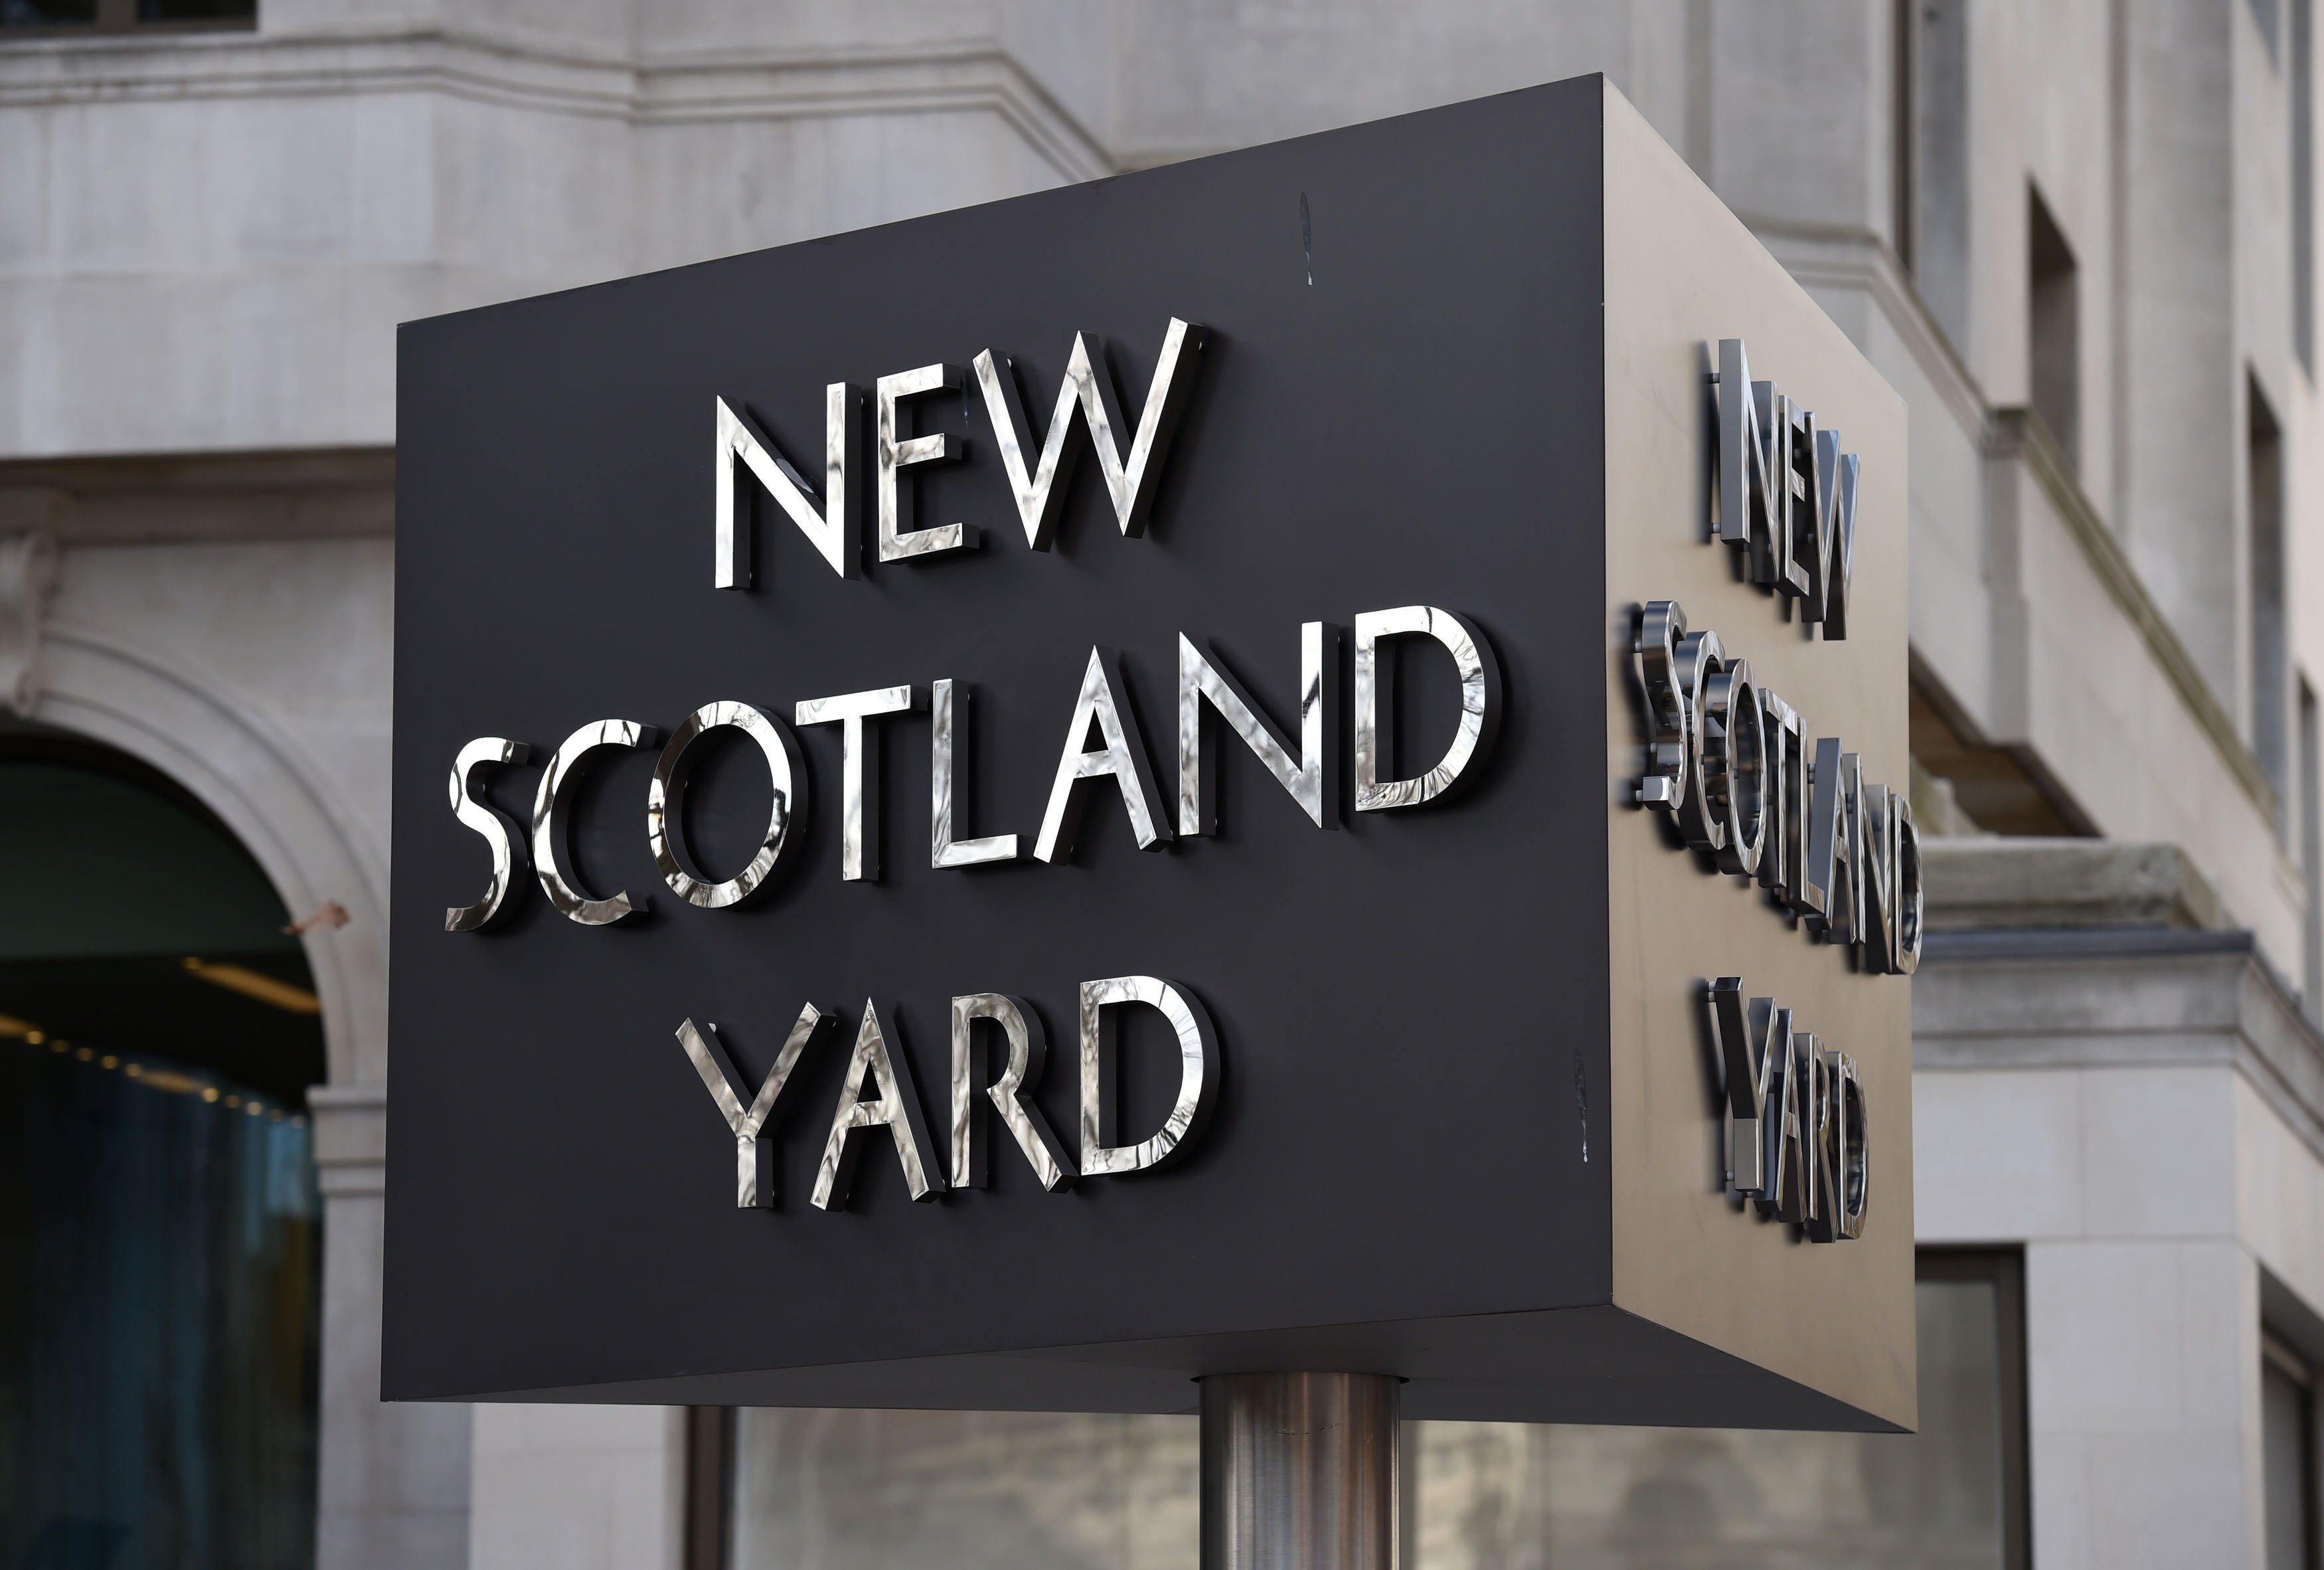 The Metropolitan Police force has been placed on special measures